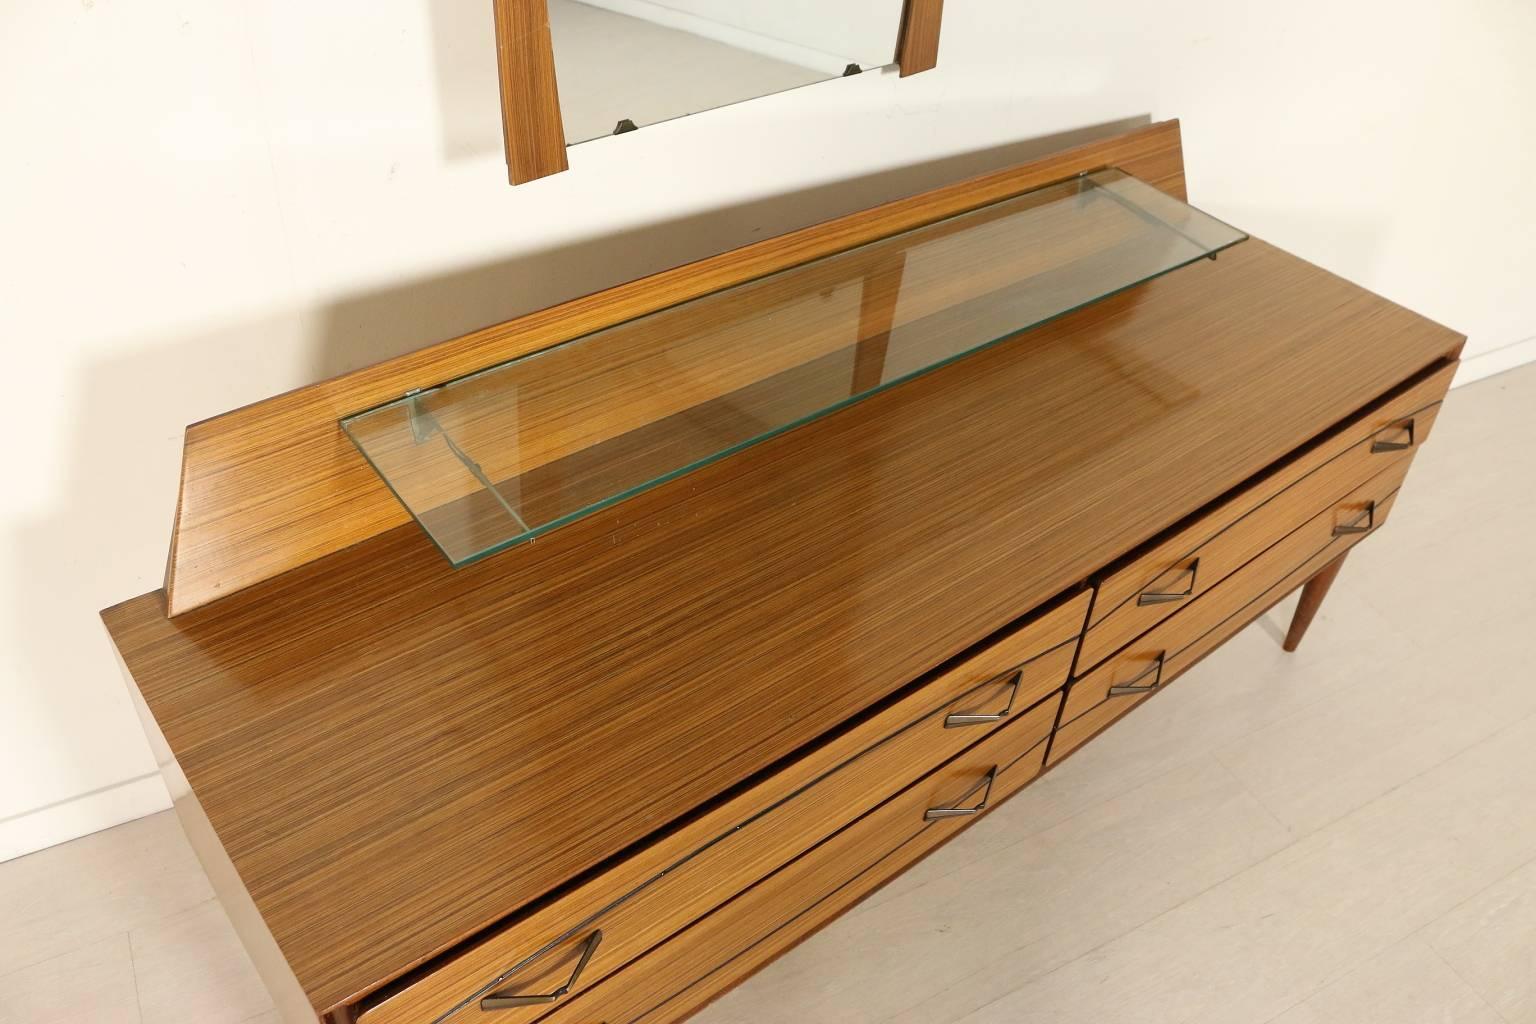 A chest of drawers with mirror, rosewood veneer, glass top. Manufactured in Italy, 1960s. Dimensions of the mirror: H 99 cm, L 64 cm, W 3 cm.